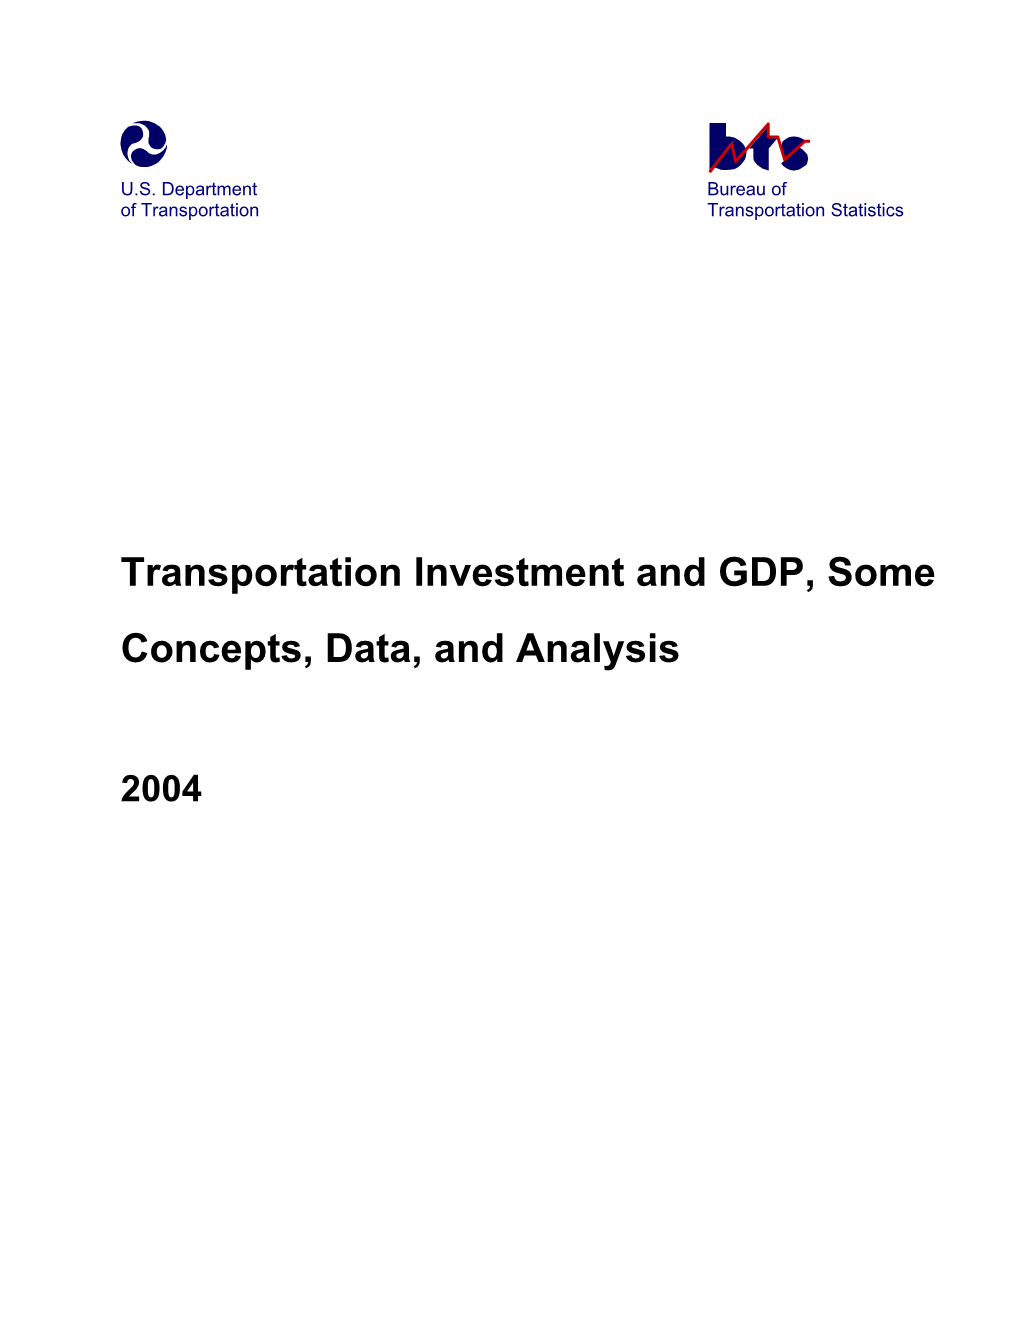 Transportation Investment and GDP, Some Concepts, Data, and Analysis